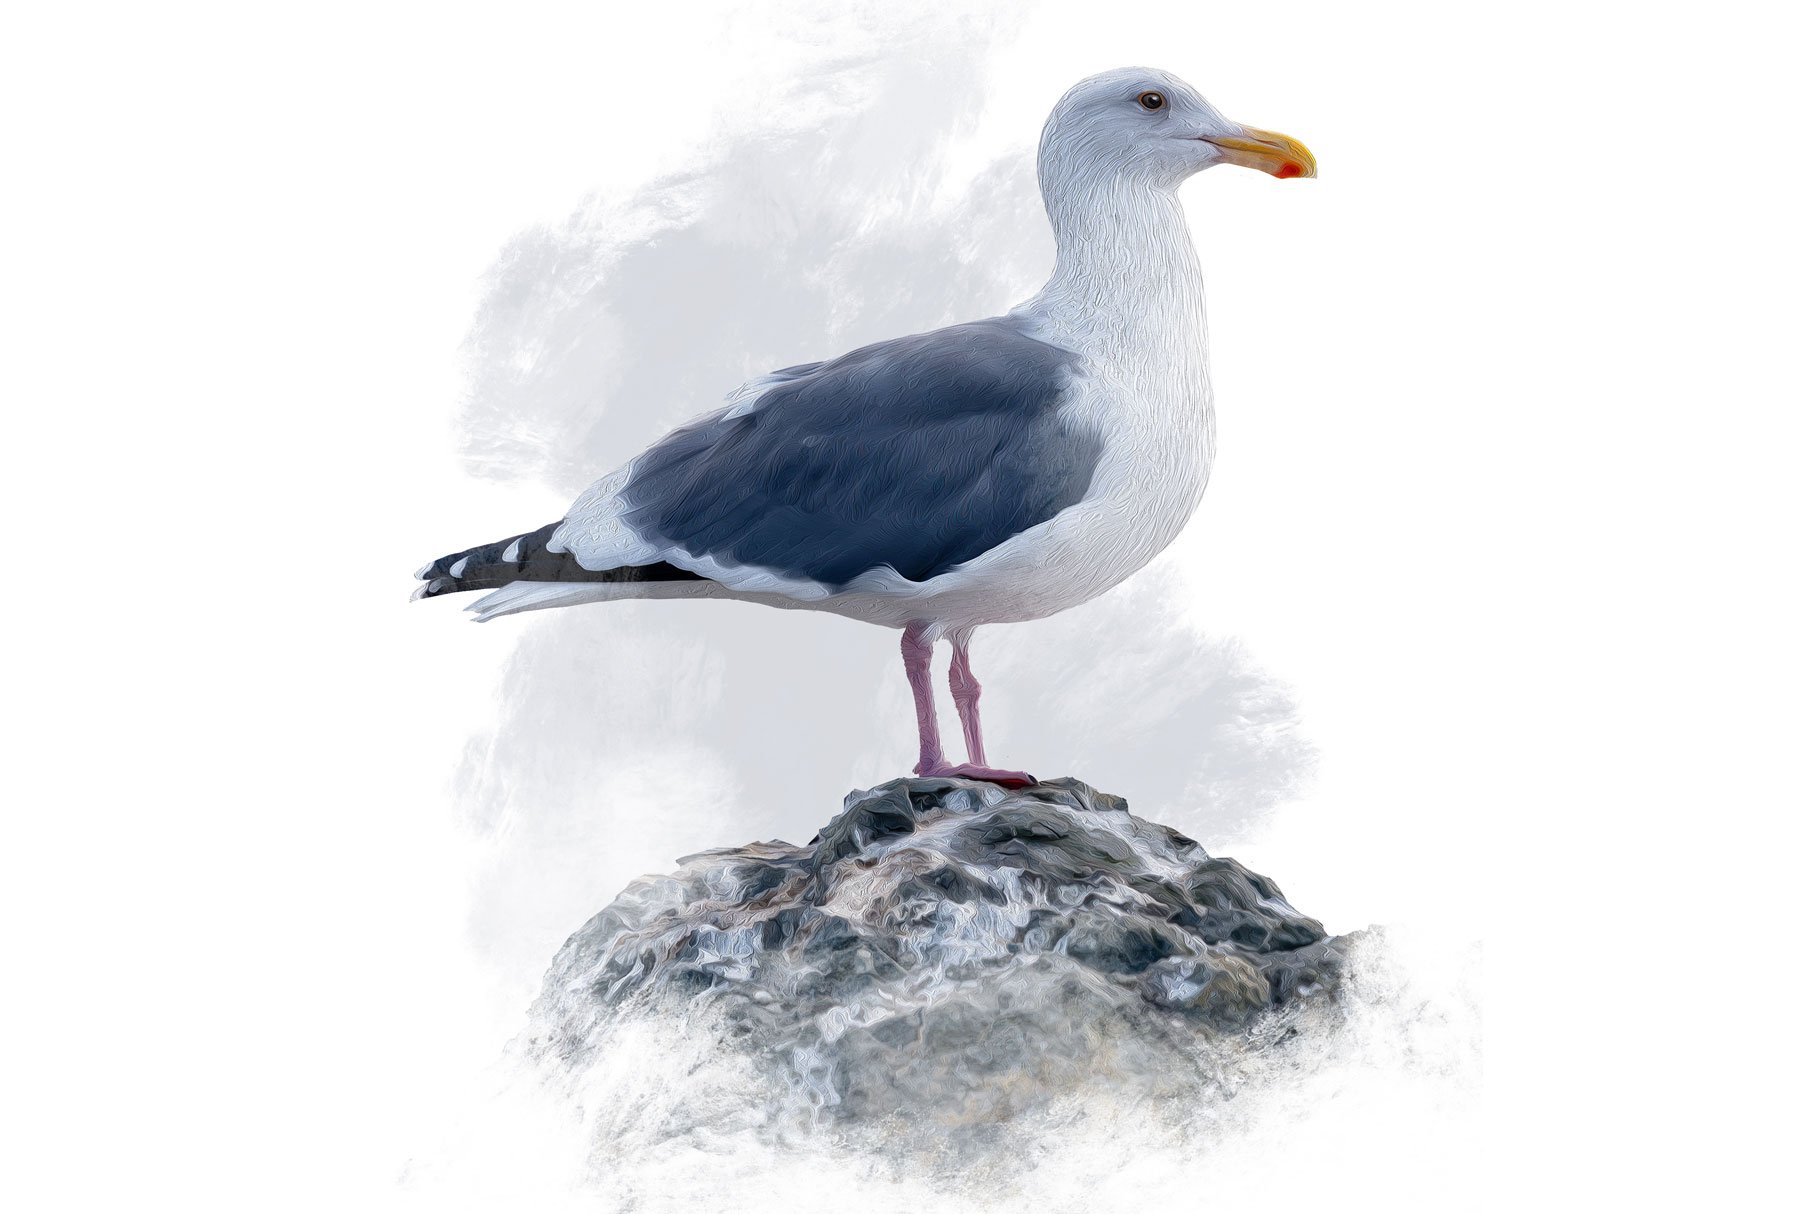 Seagull Illustration cover image.